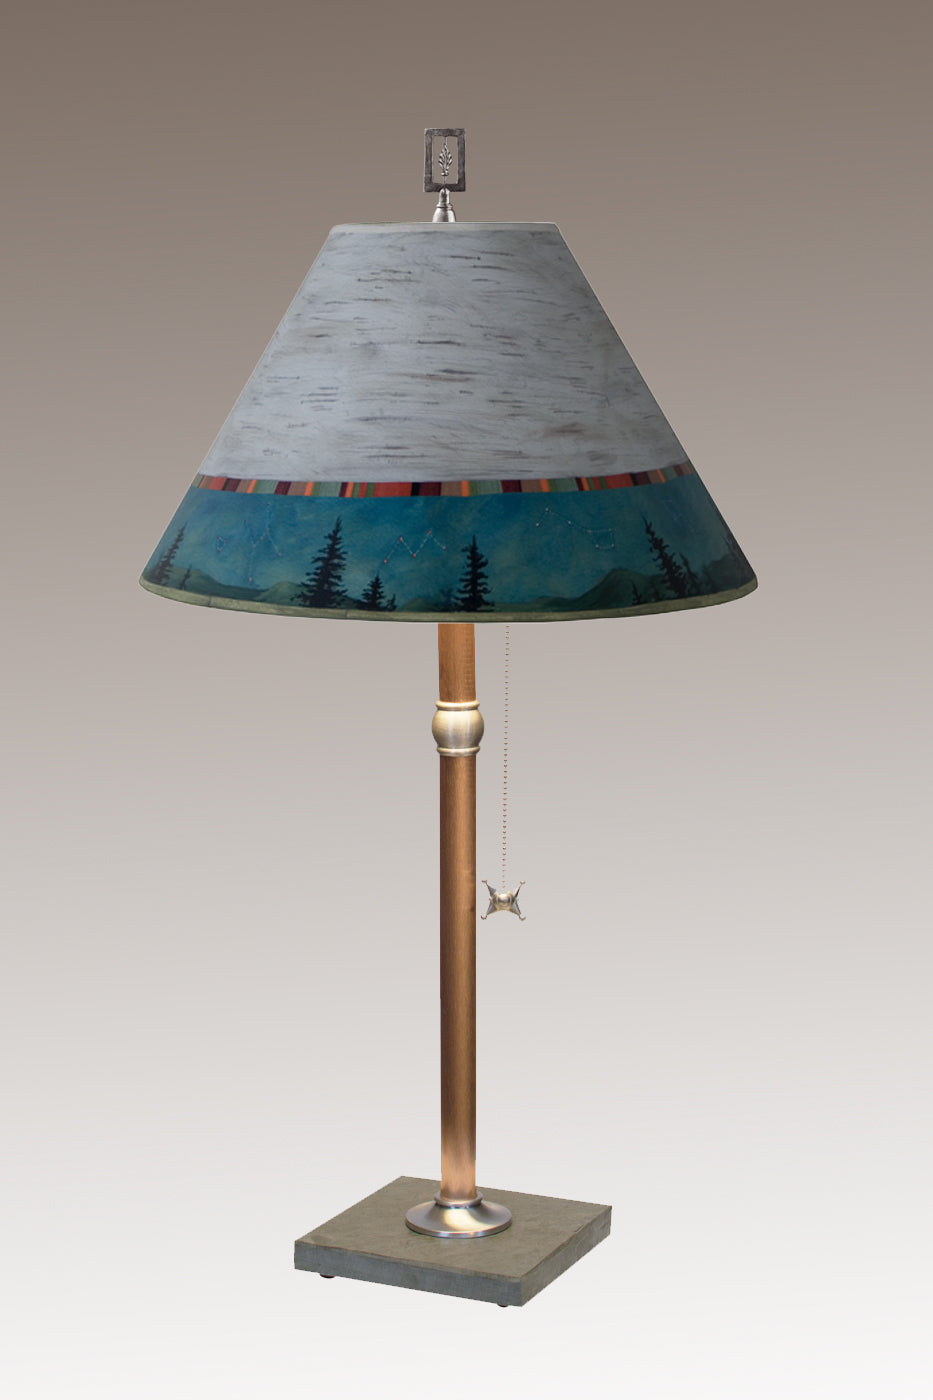 Copper Table Lamp with Medium Conical Shade in Birch Midnight